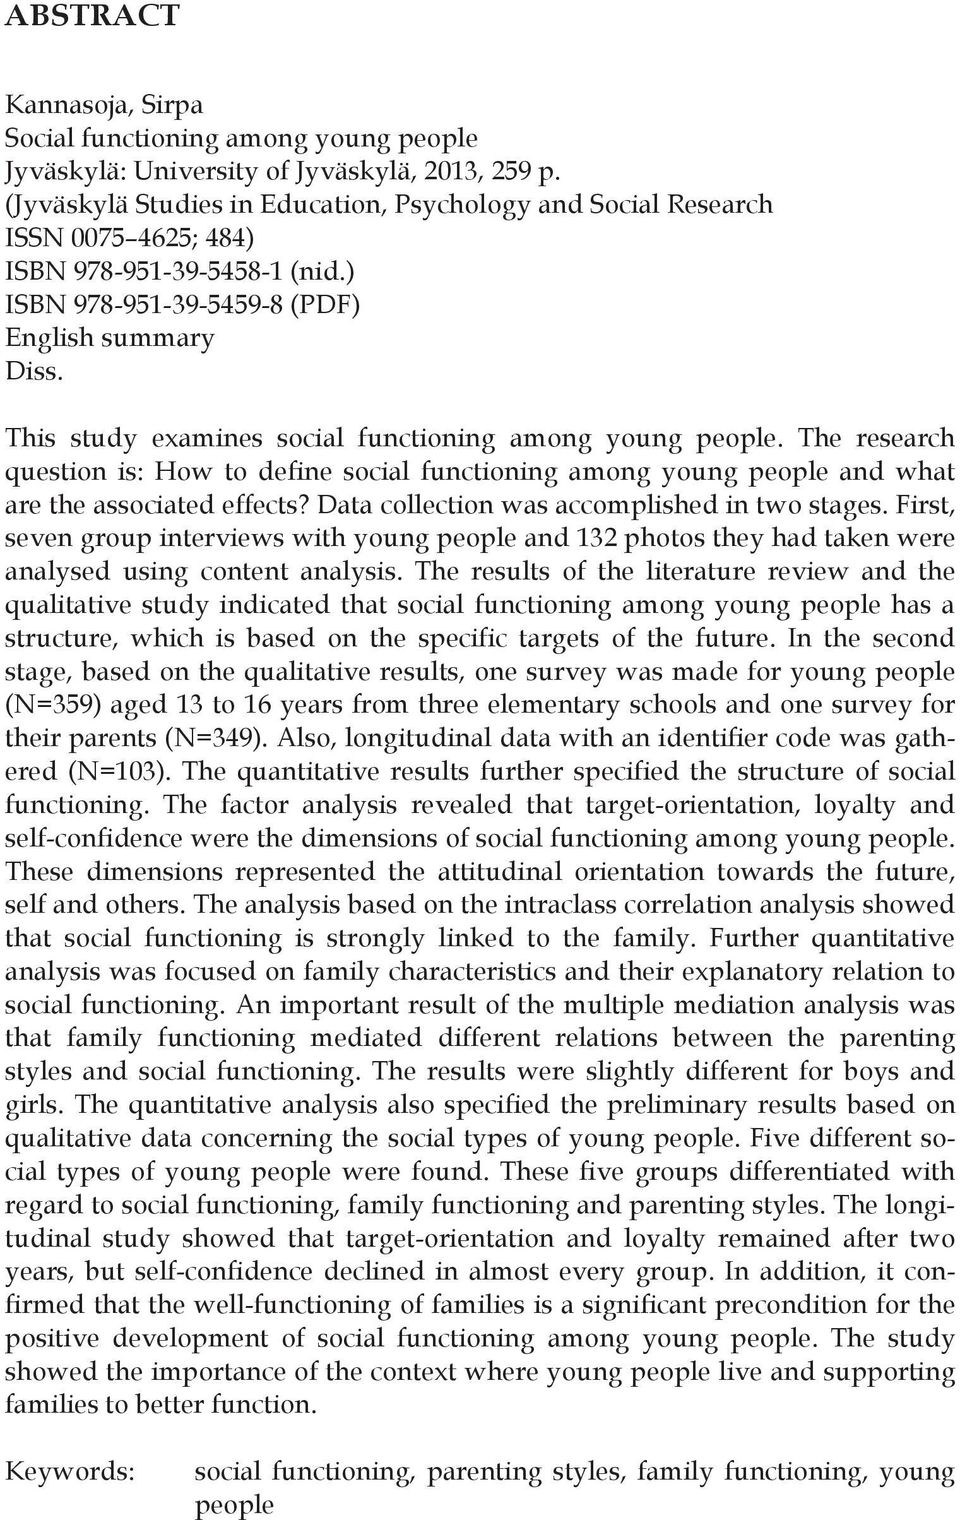 This study examines social functioning among young people. The research question is: How to define social functioning among young people and what are the associated effects?